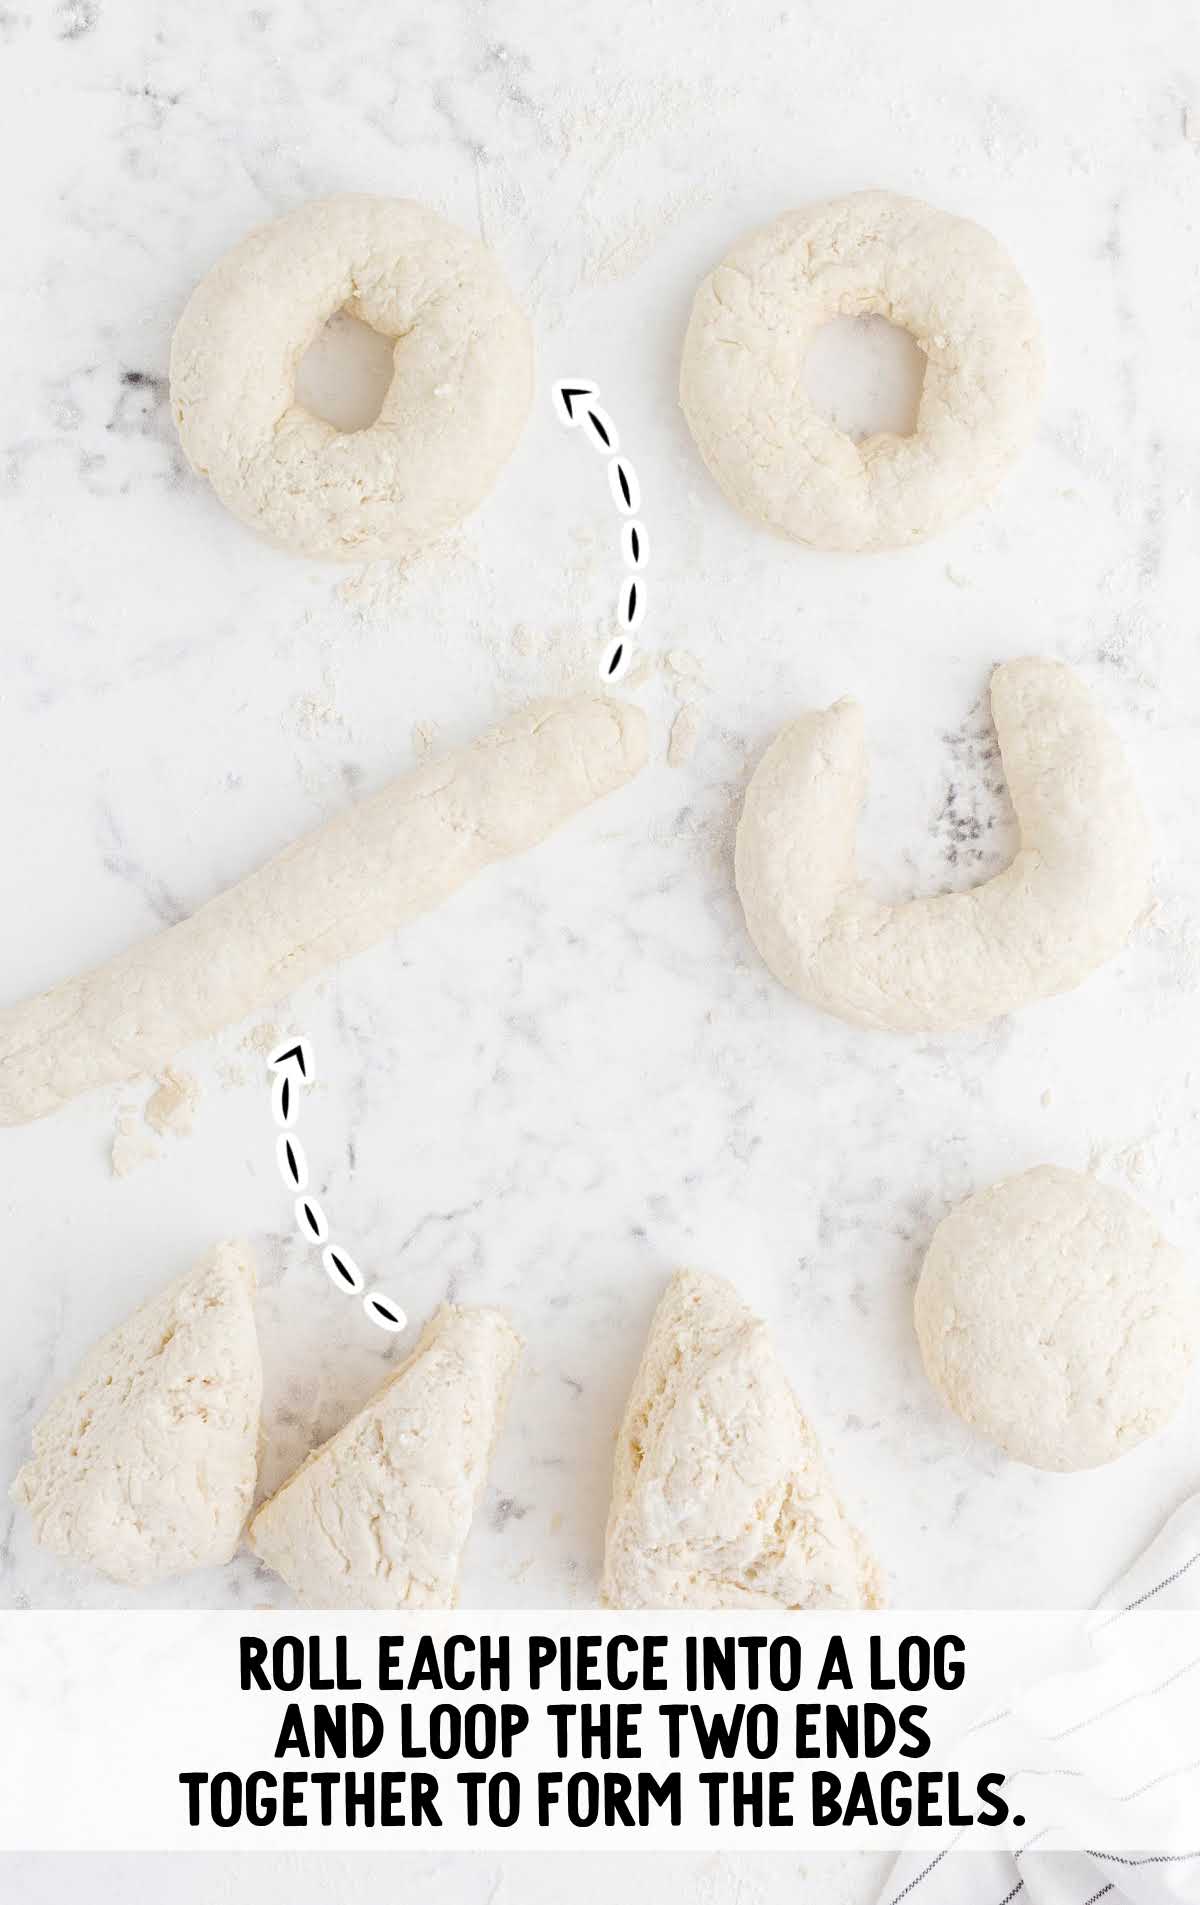 dough formed into logs then looped together at the end to form the shape of a bagel